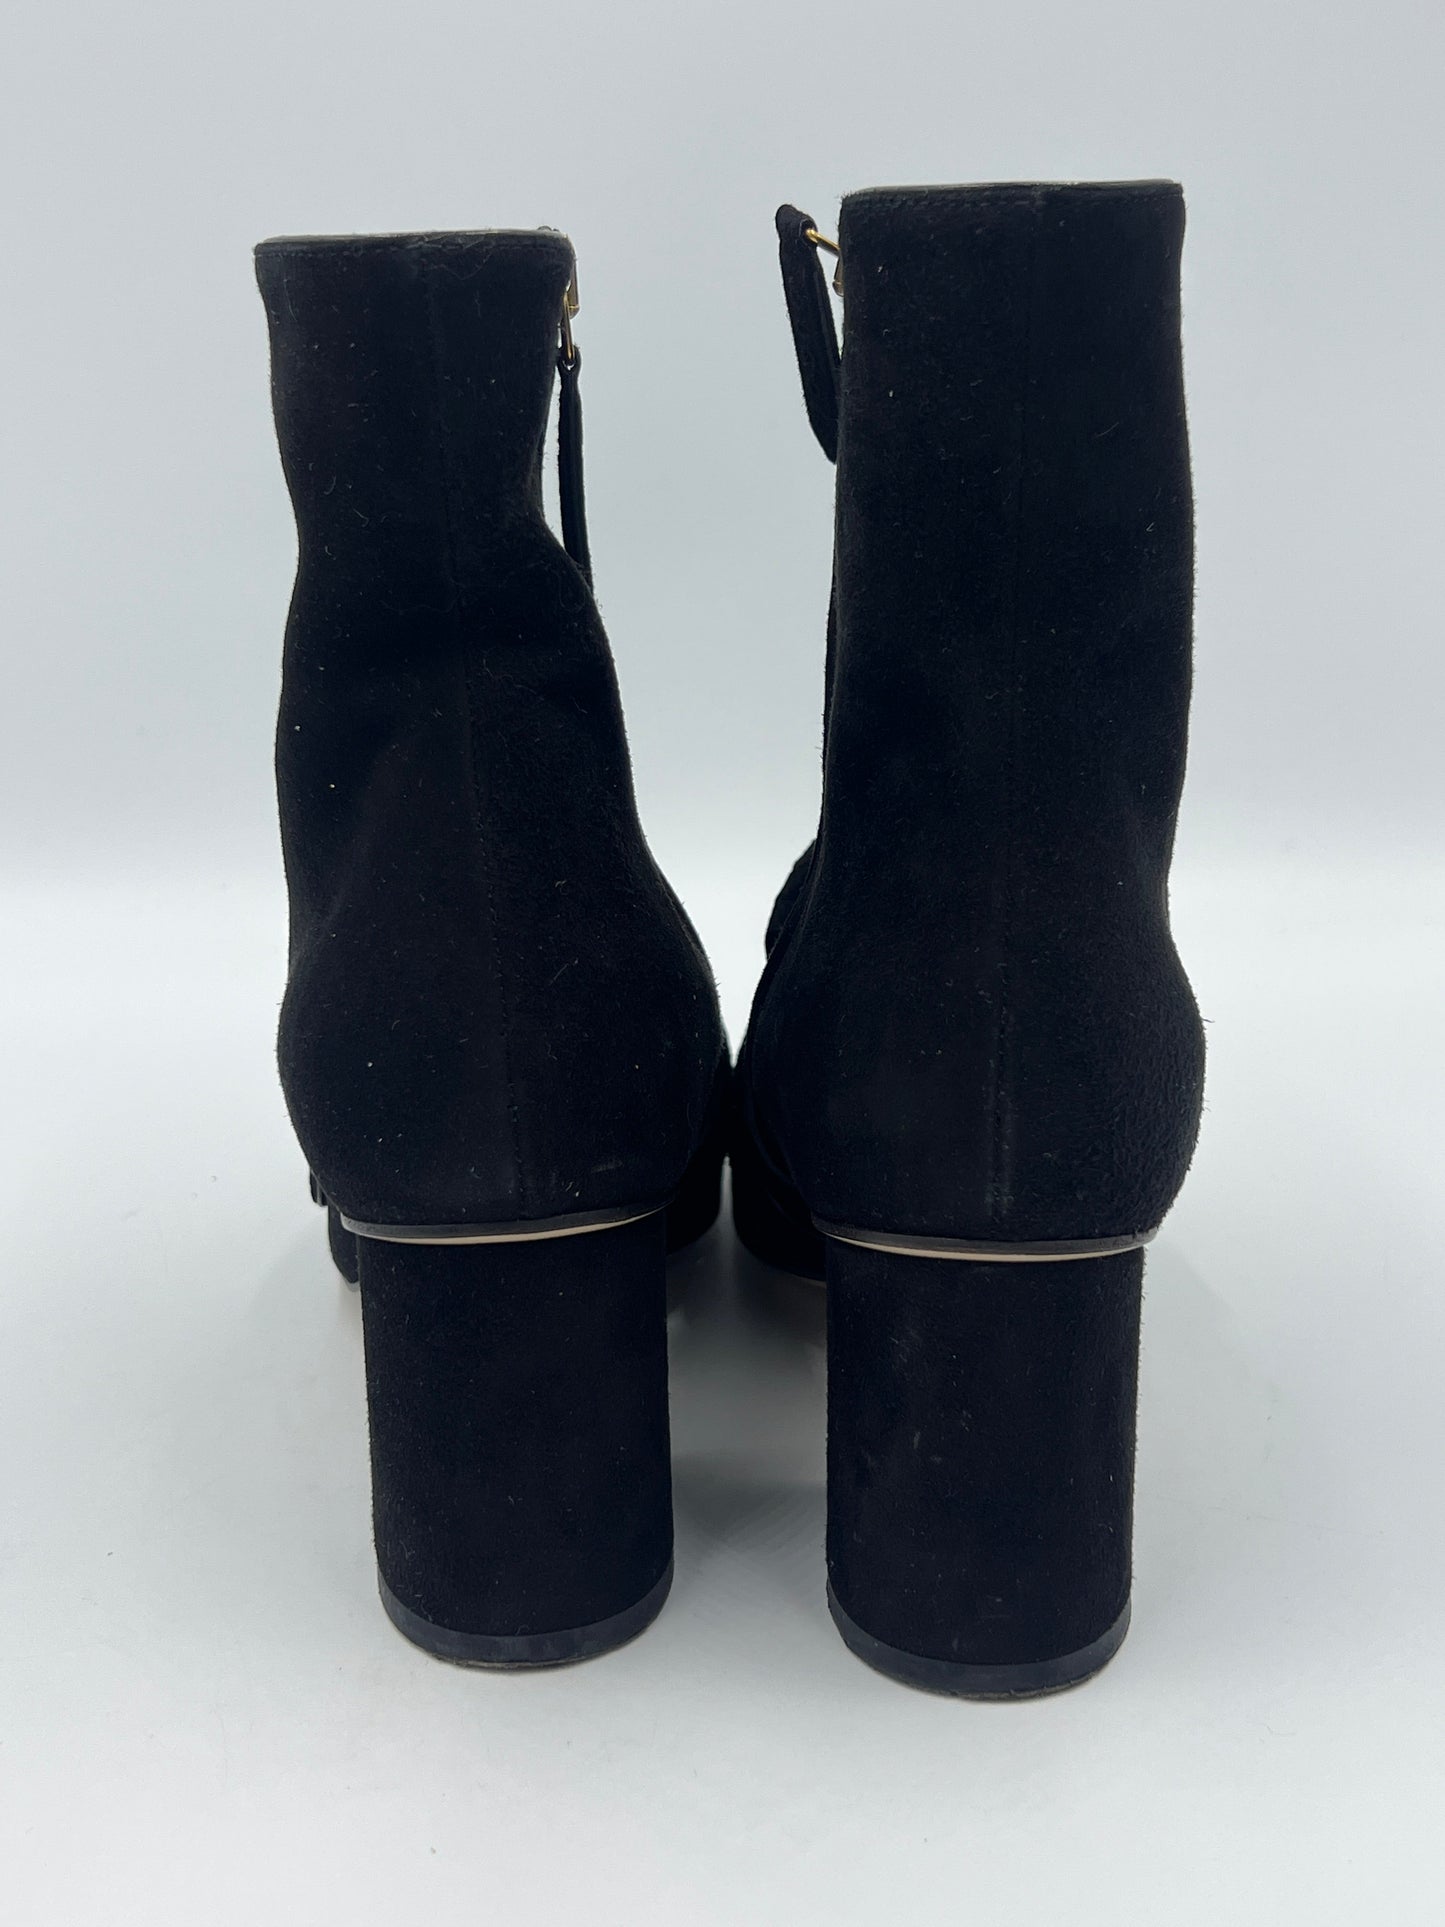 Gucci GG Marmont Fringe Boots  Size: 6 (36)